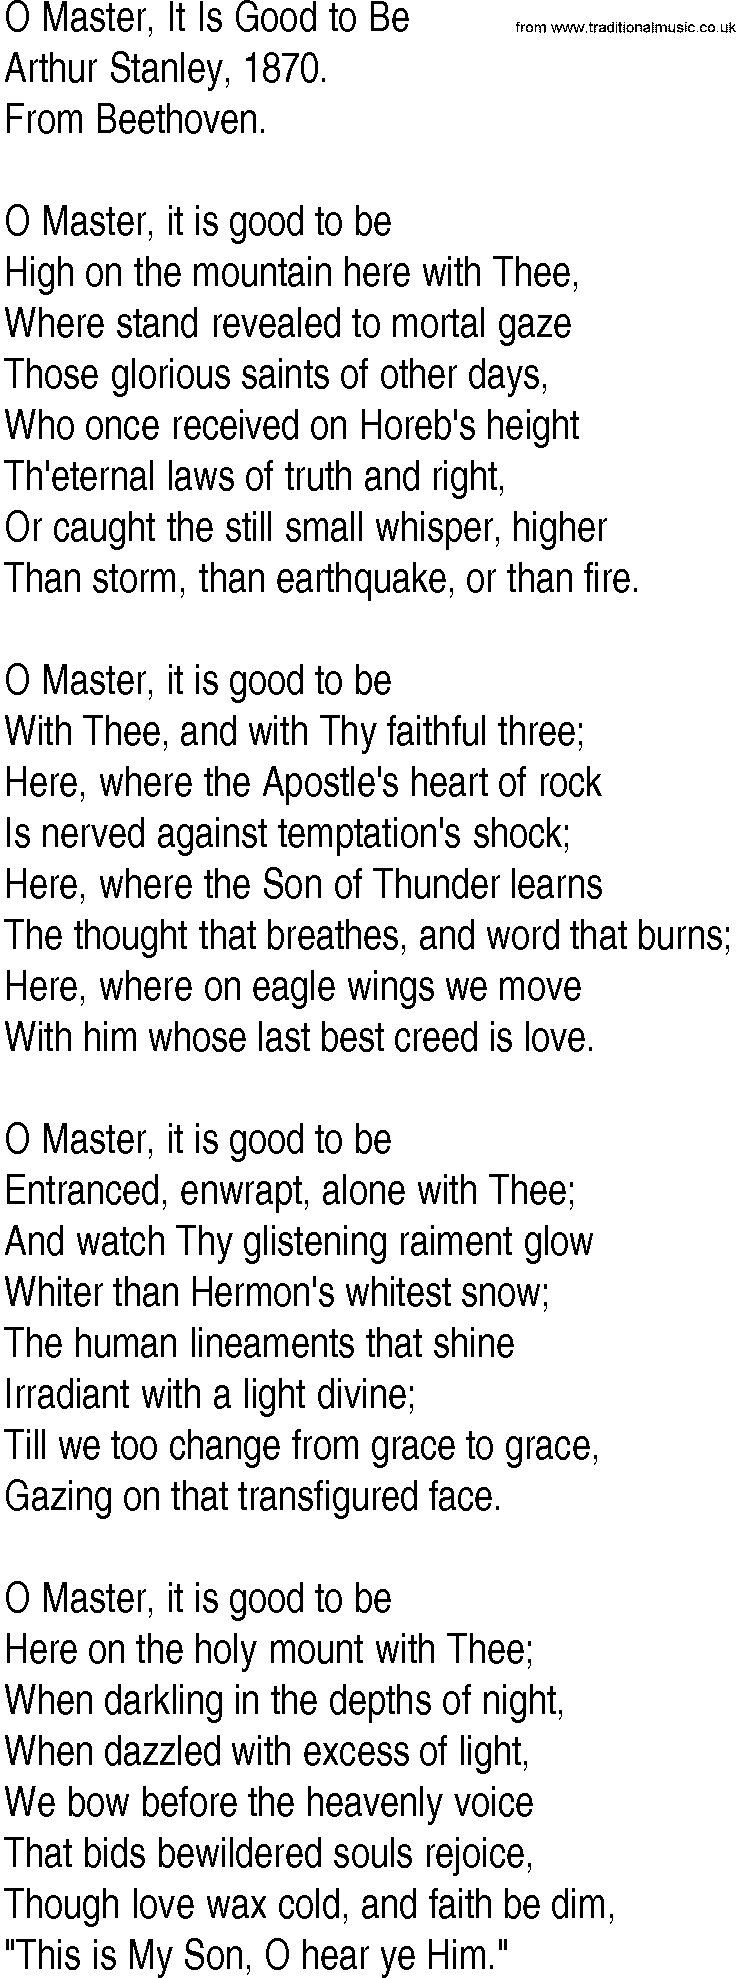 Hymn and Gospel Song: O Master, It Is Good to Be by Arthur Stanley lyrics